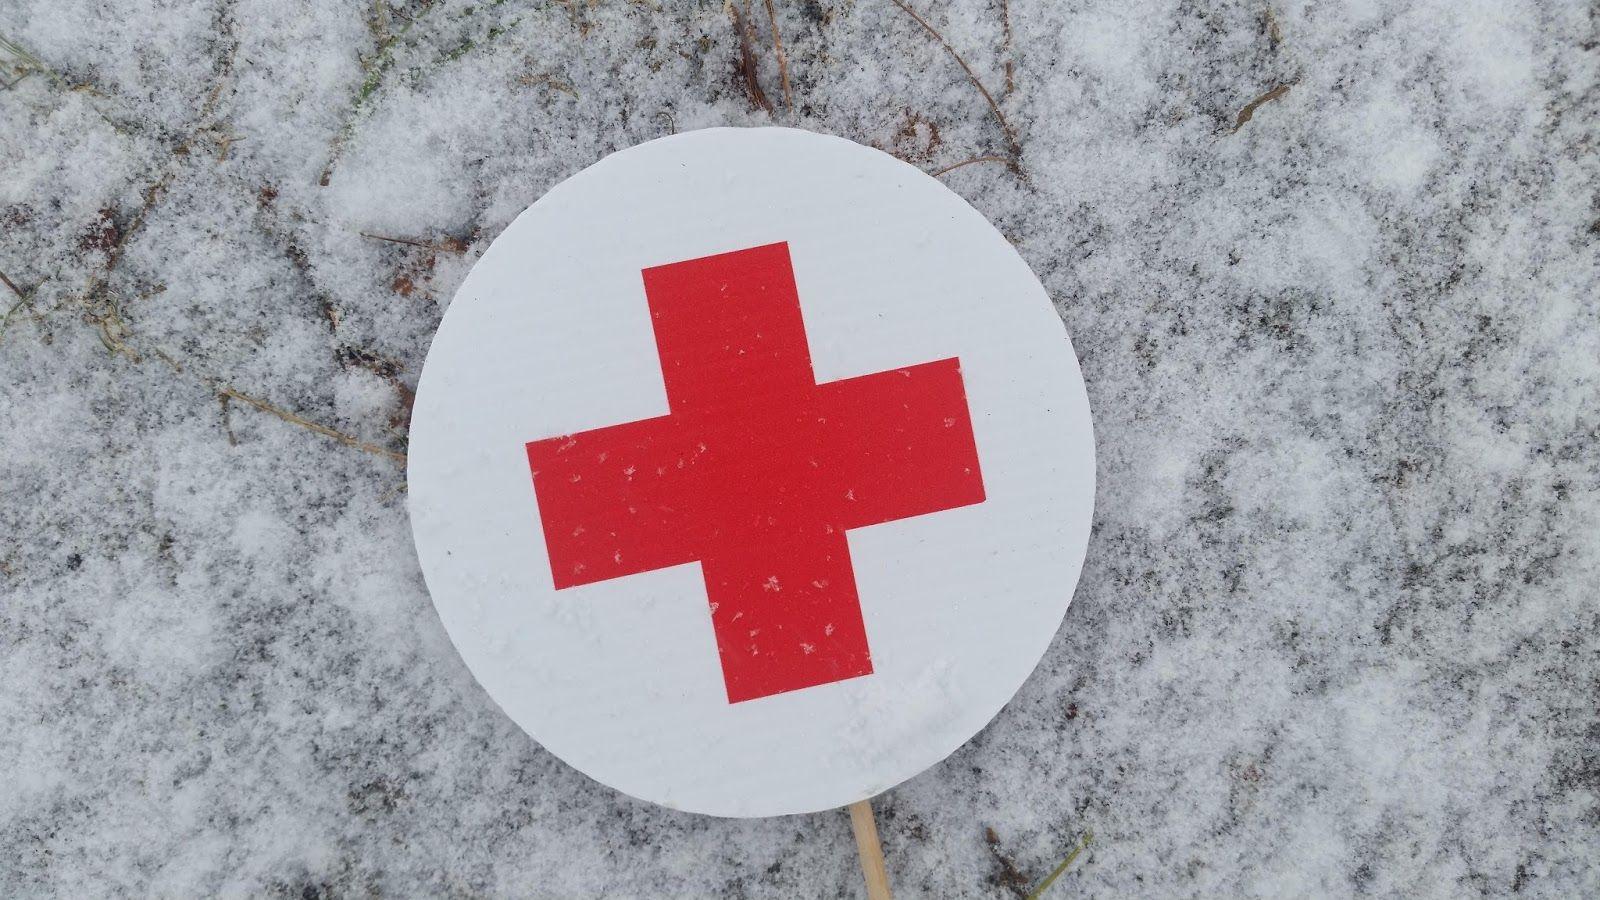 600 Free Red Cross  Cross Images  Pixabay